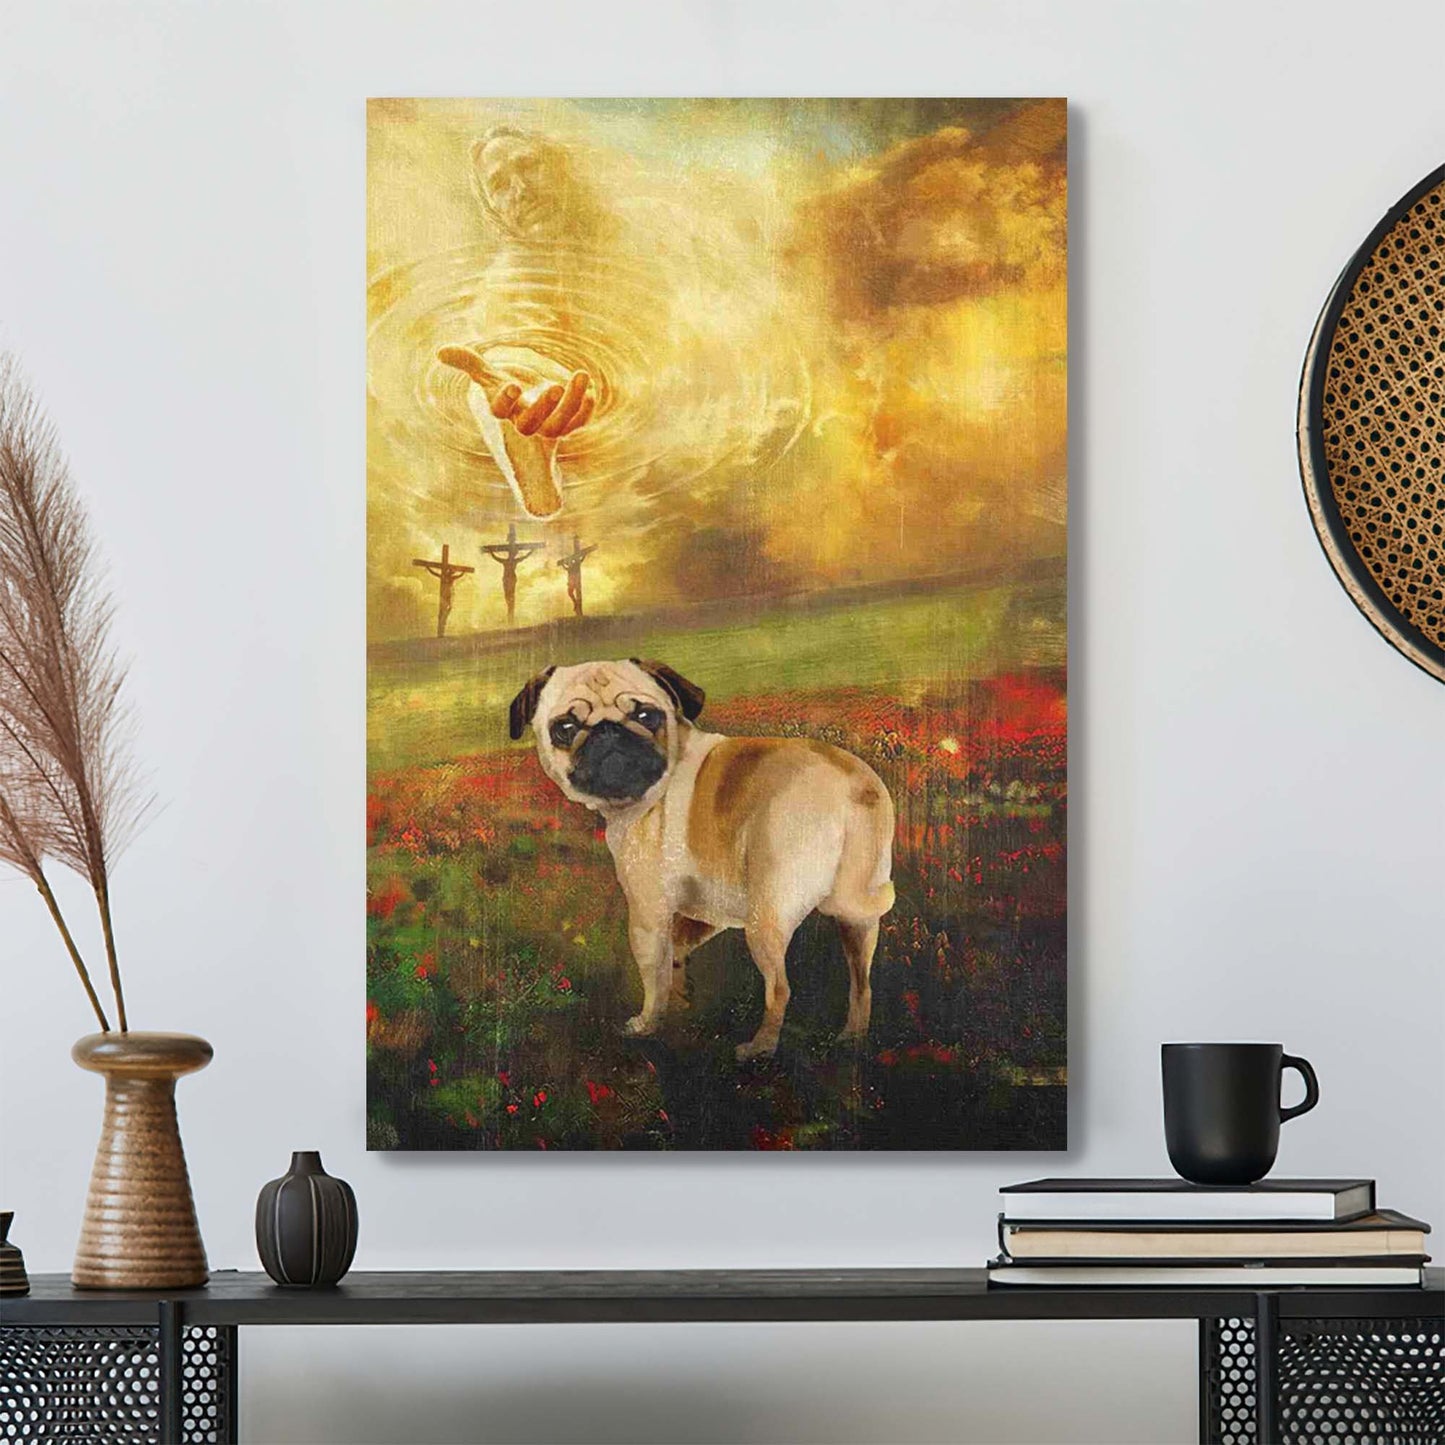 Christian Canvas Wall Art - Jesus And Pug - To The Beautiful World Canvas - Bible Verse Canvas - Ciaocustom